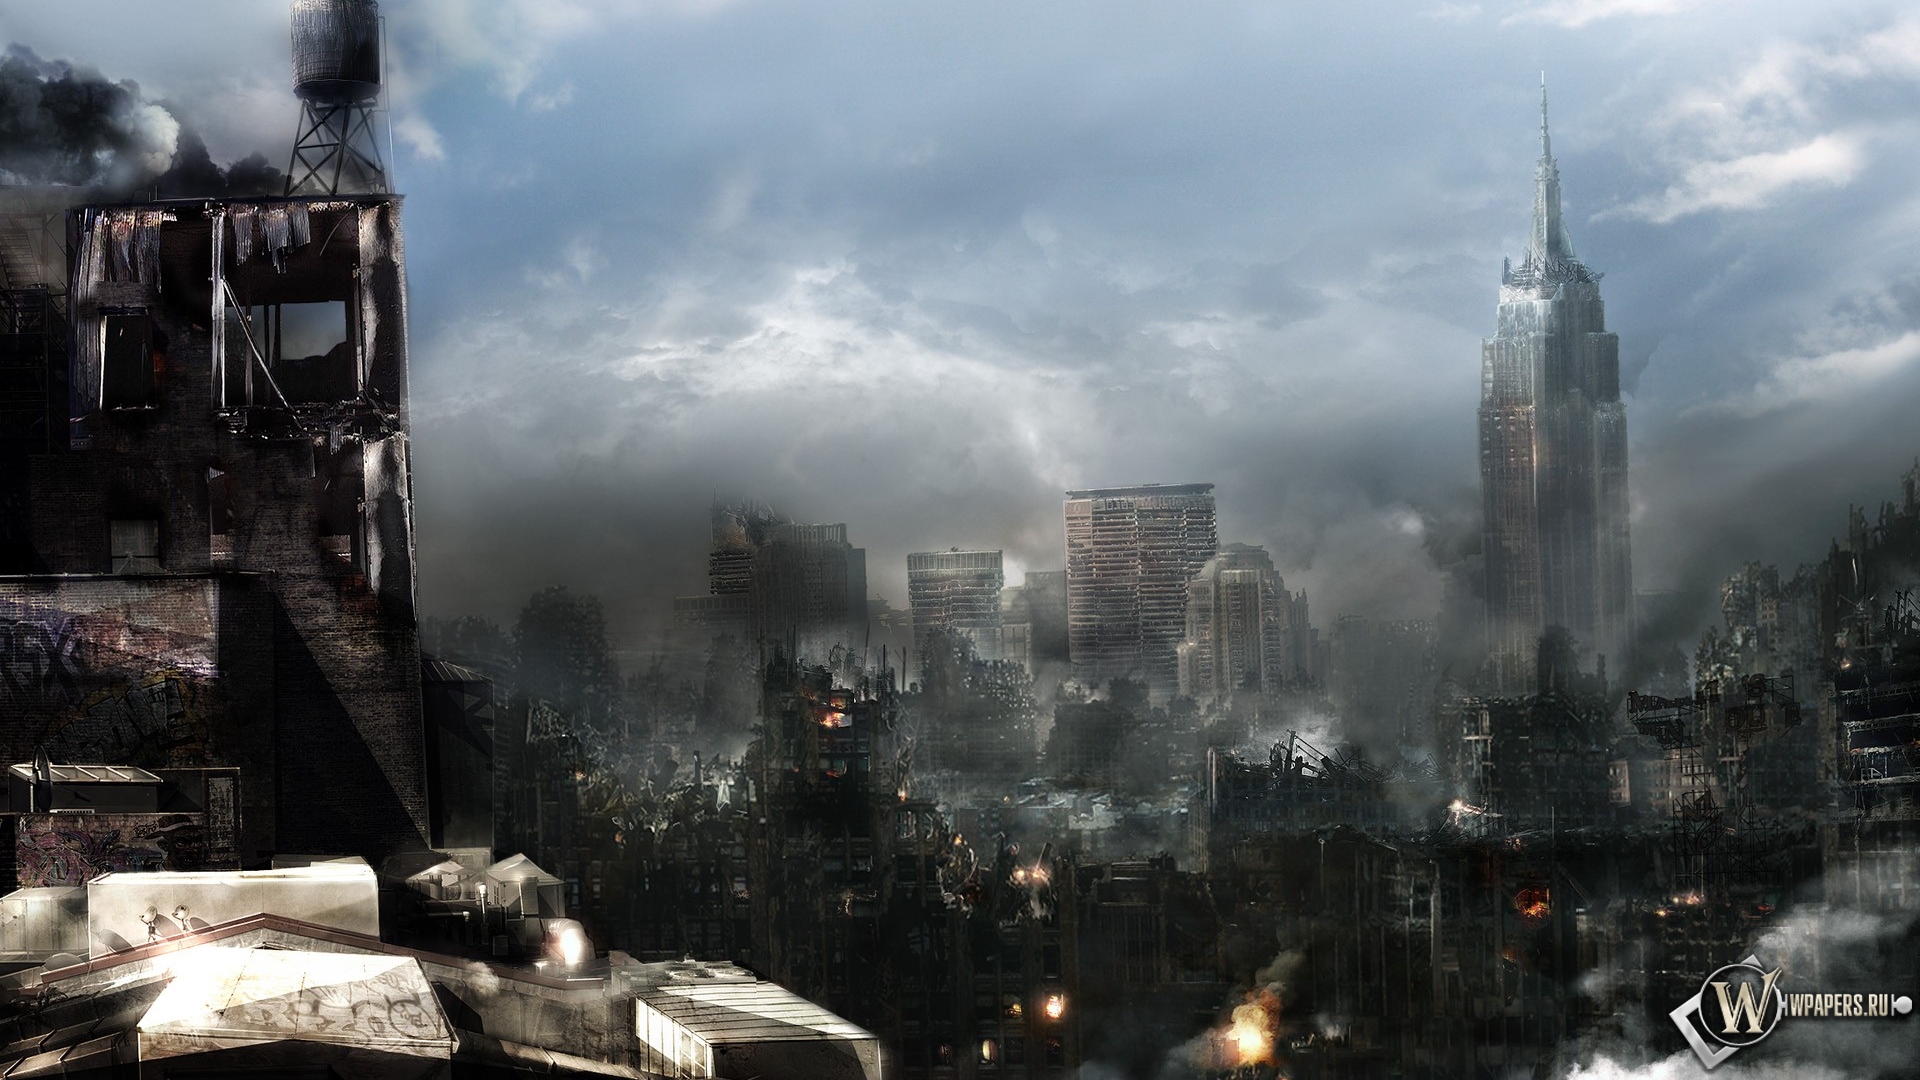 Destroyed cities 1920x1080